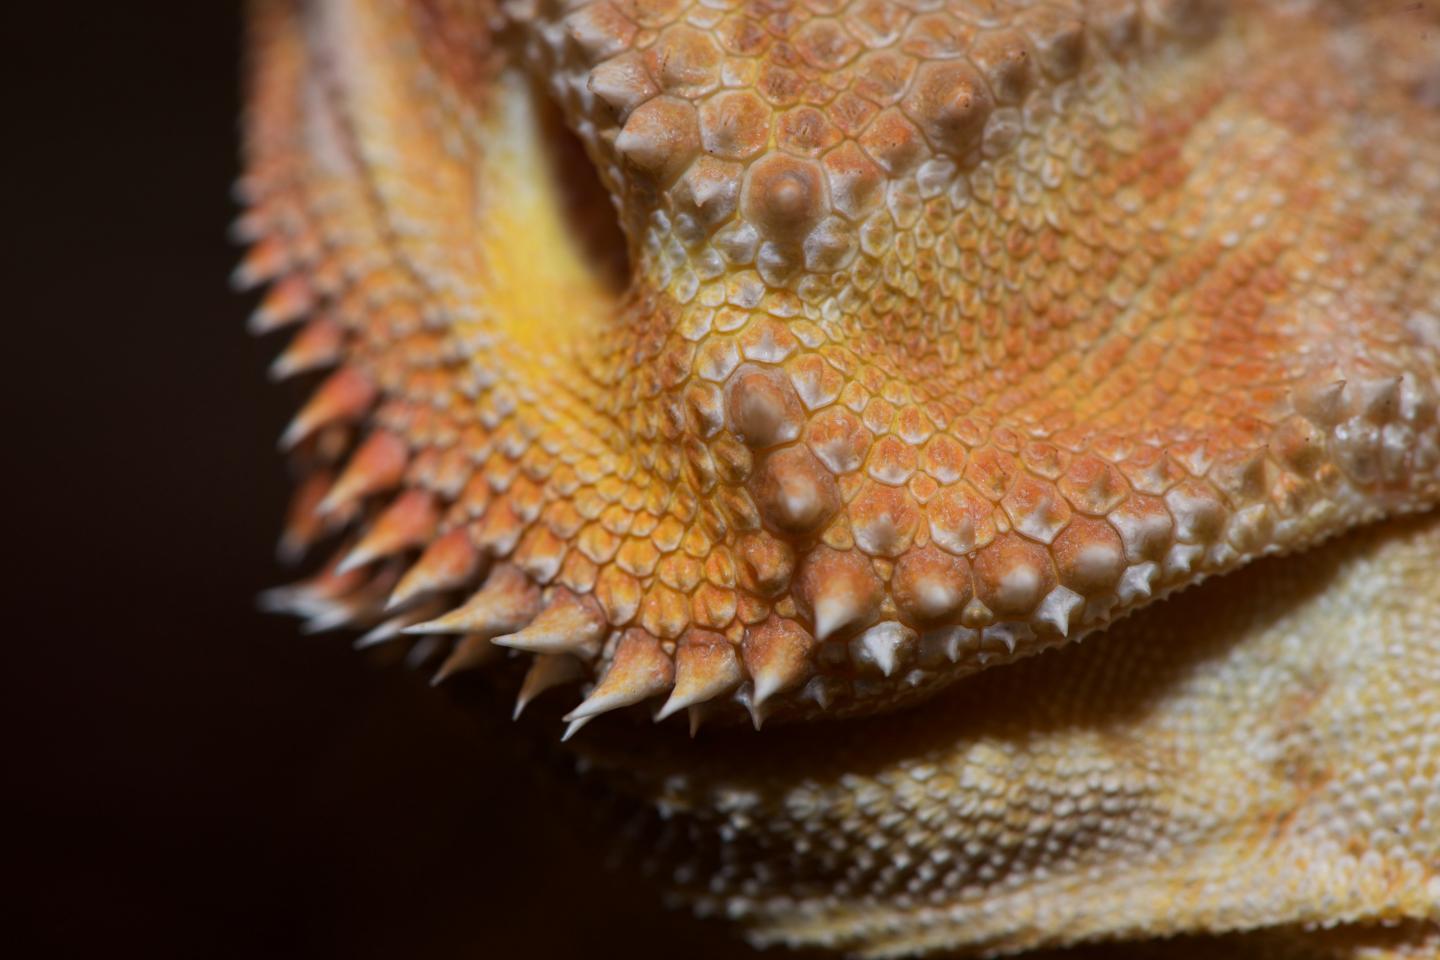 Hair & feathers evolved from reptile scales